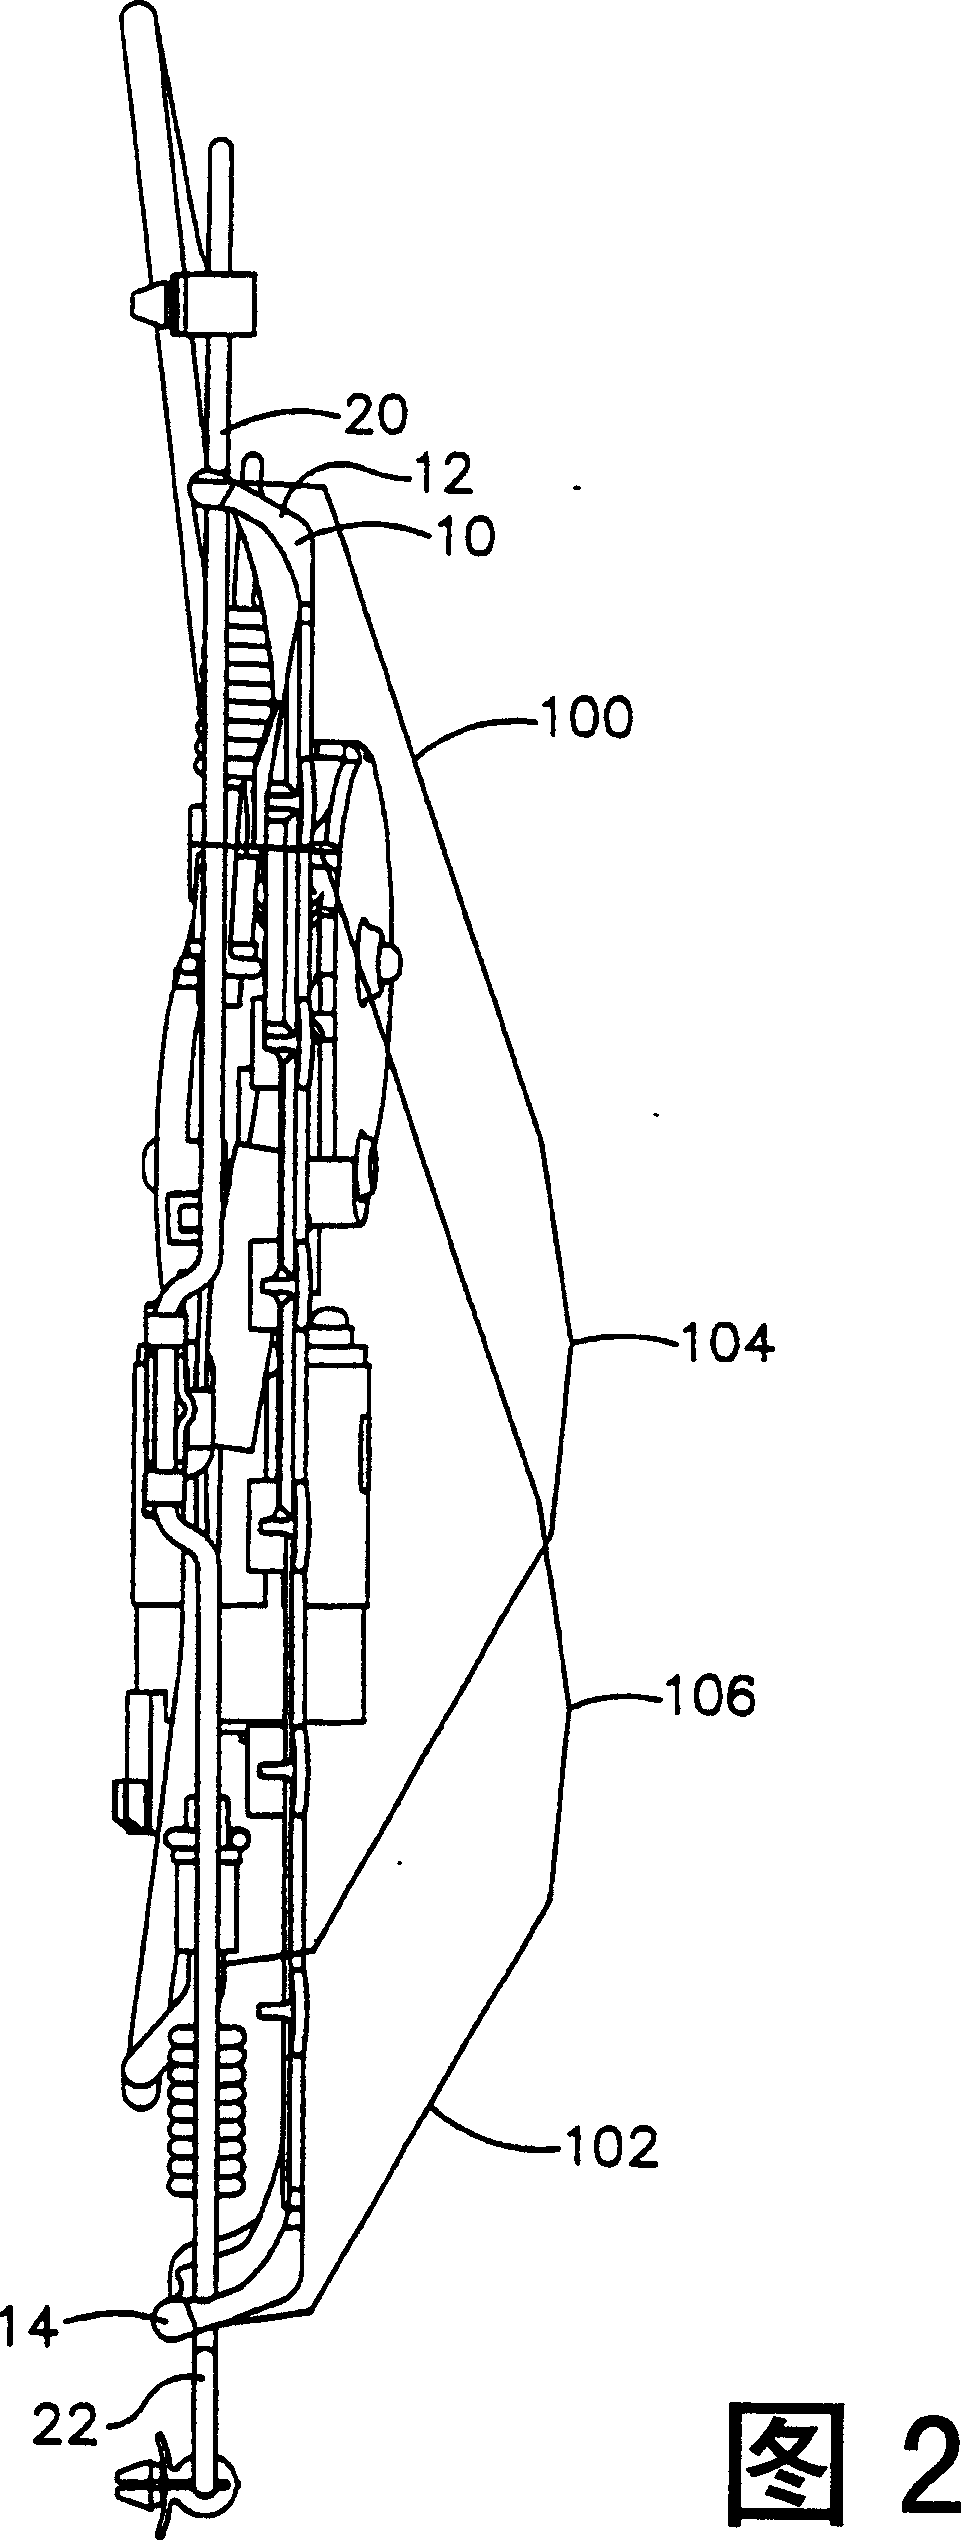 Apparatus and method for lumbar support with variable apex